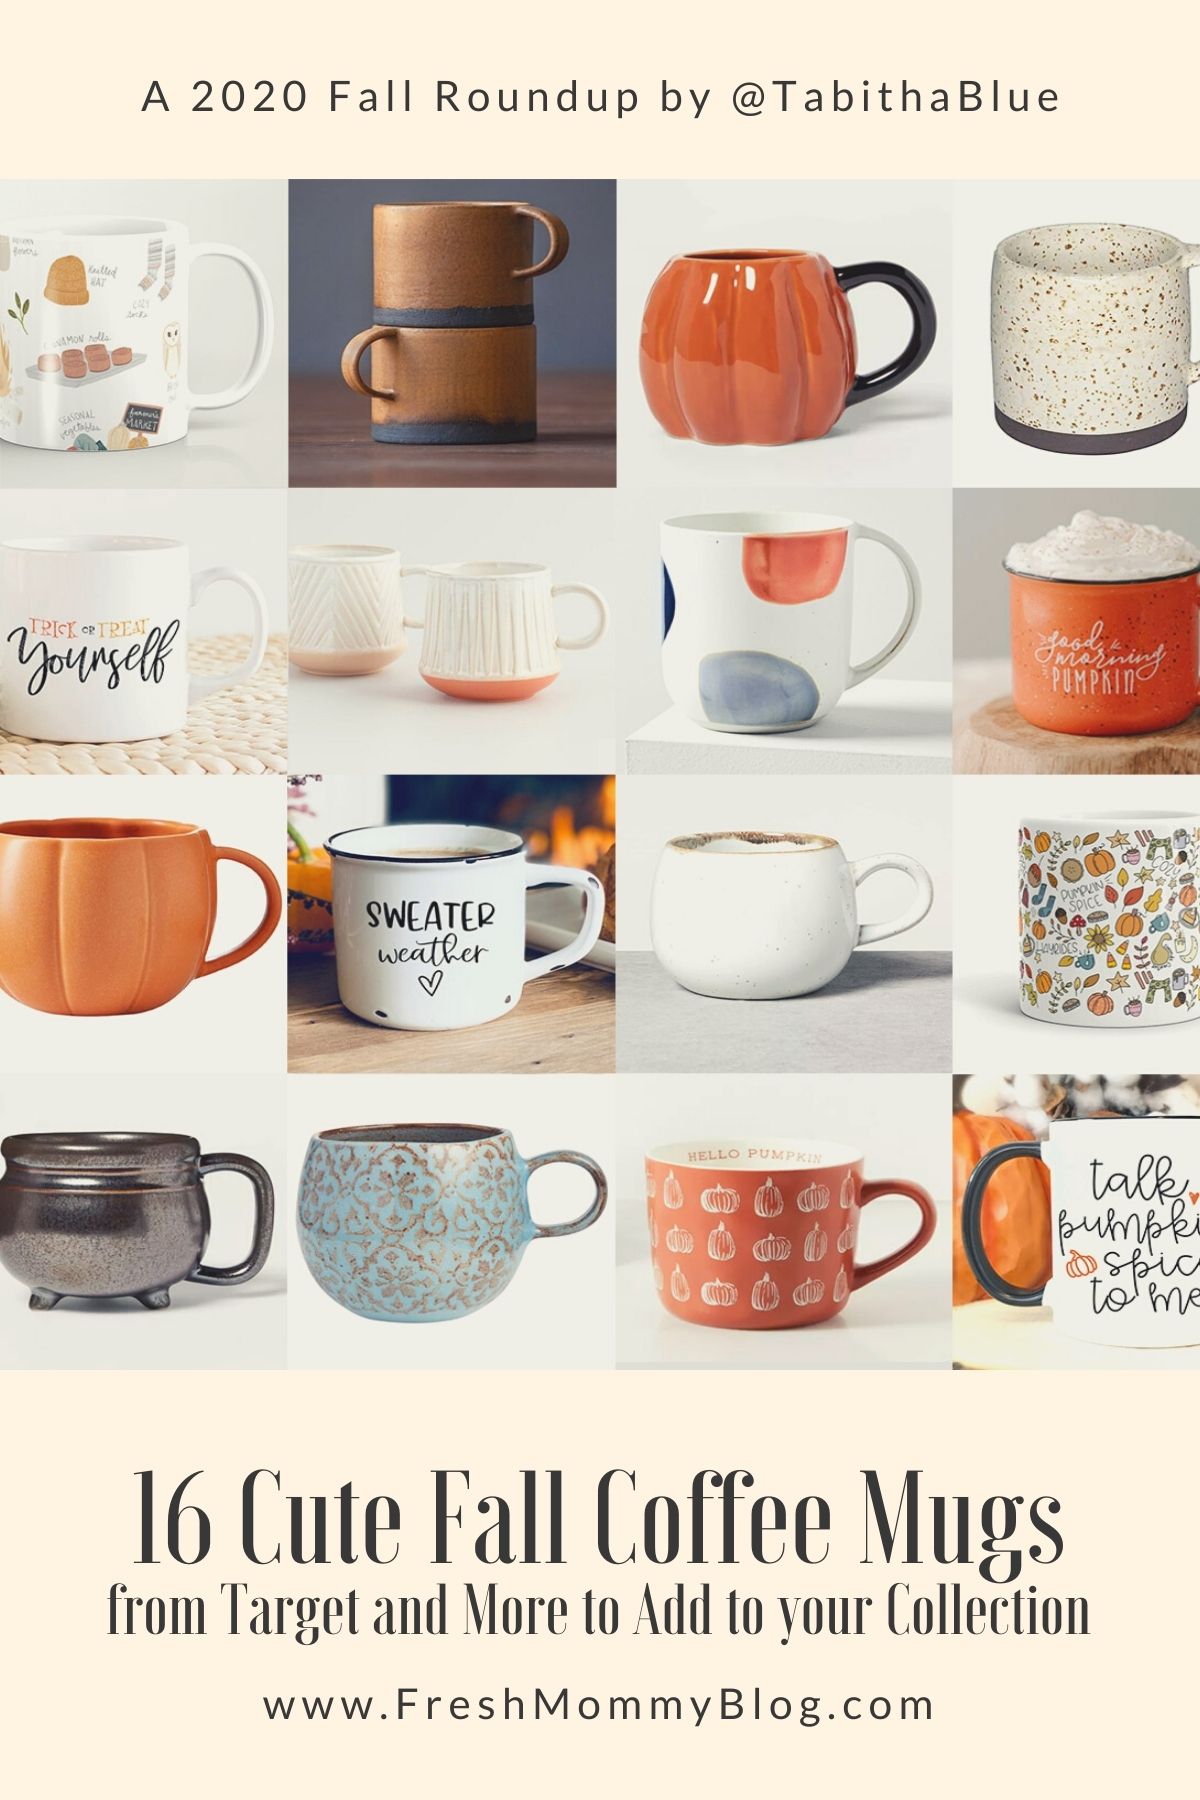 16 Cute Fall Coffee Mugs from Target and More to Add to your Collection from Tabitha Blue of Fresh Mommy Blog